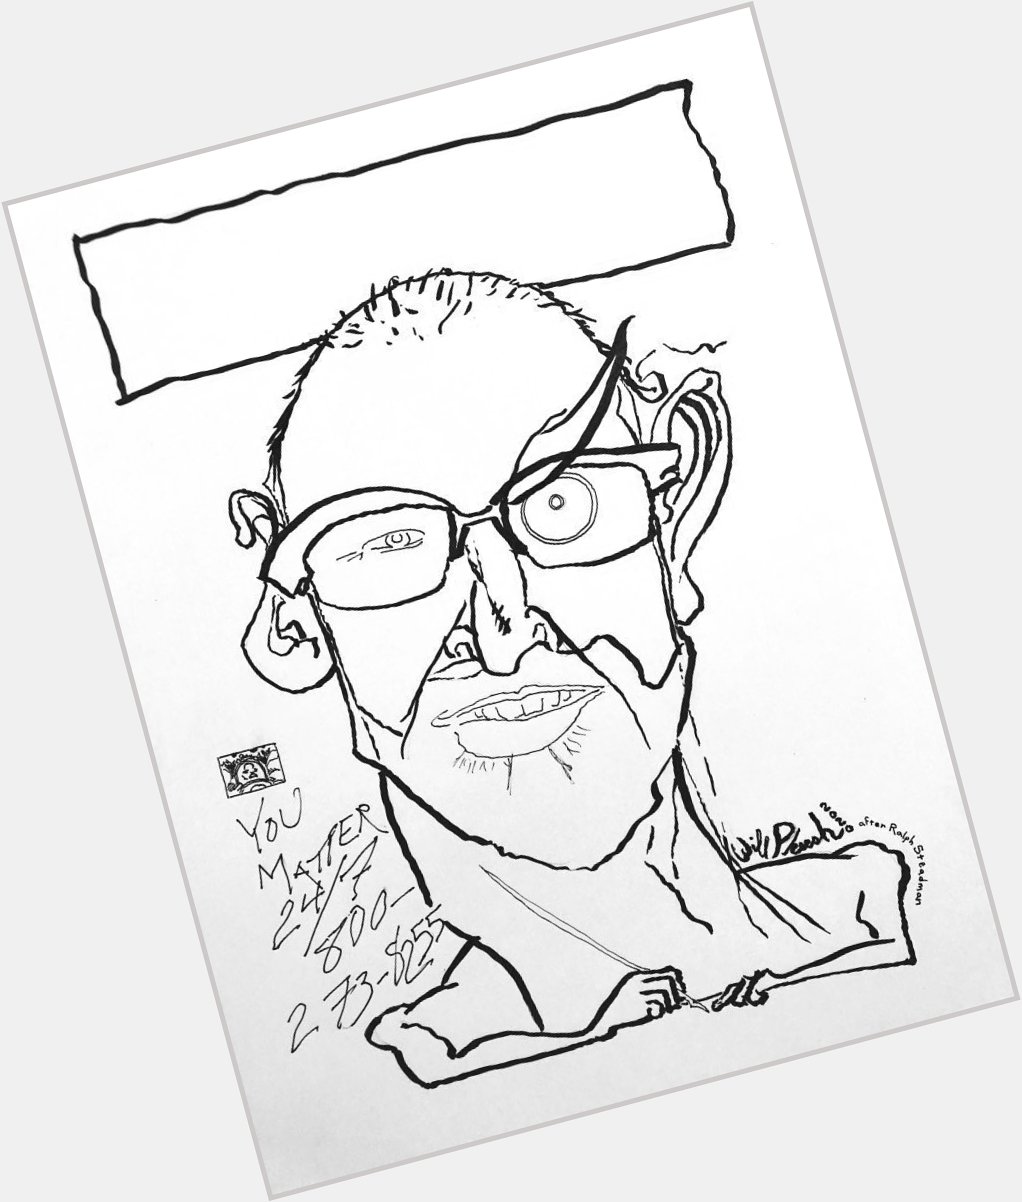 Happy Birthday, Ralph Steadman, after whose art I did this homaging self-portrait.  